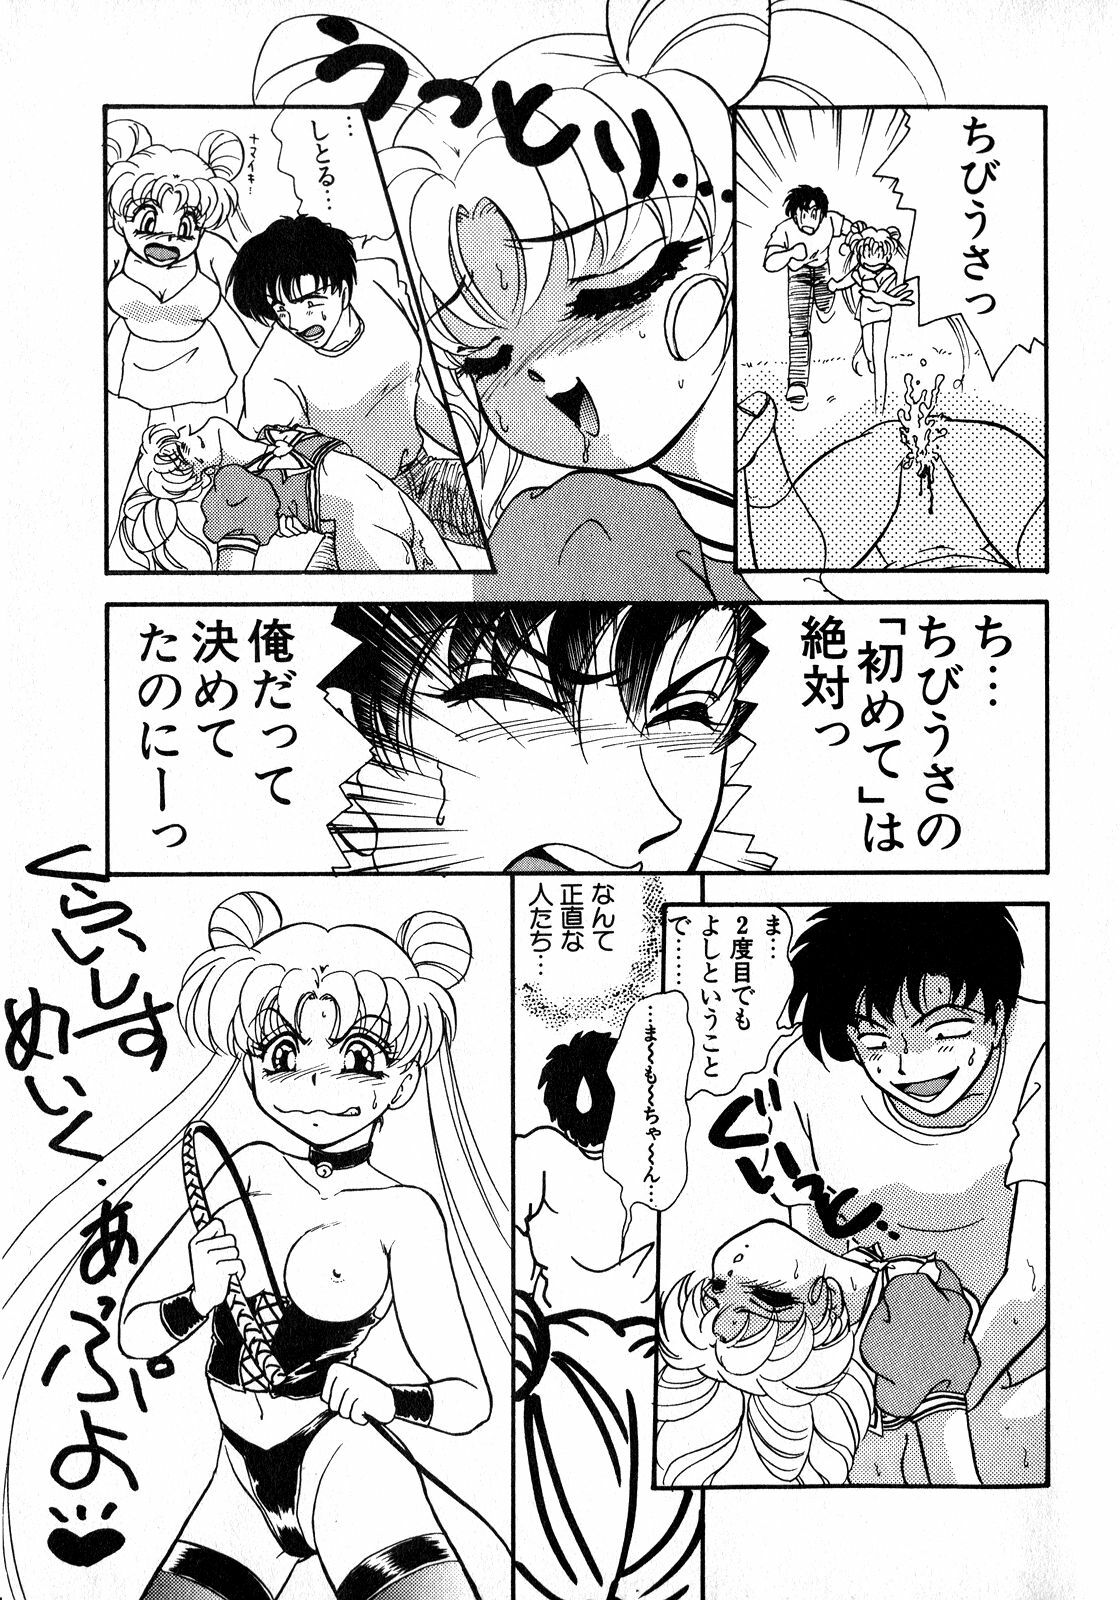 [Anthology] Lunatic Party 8 (Sailor Moon) page 36 full